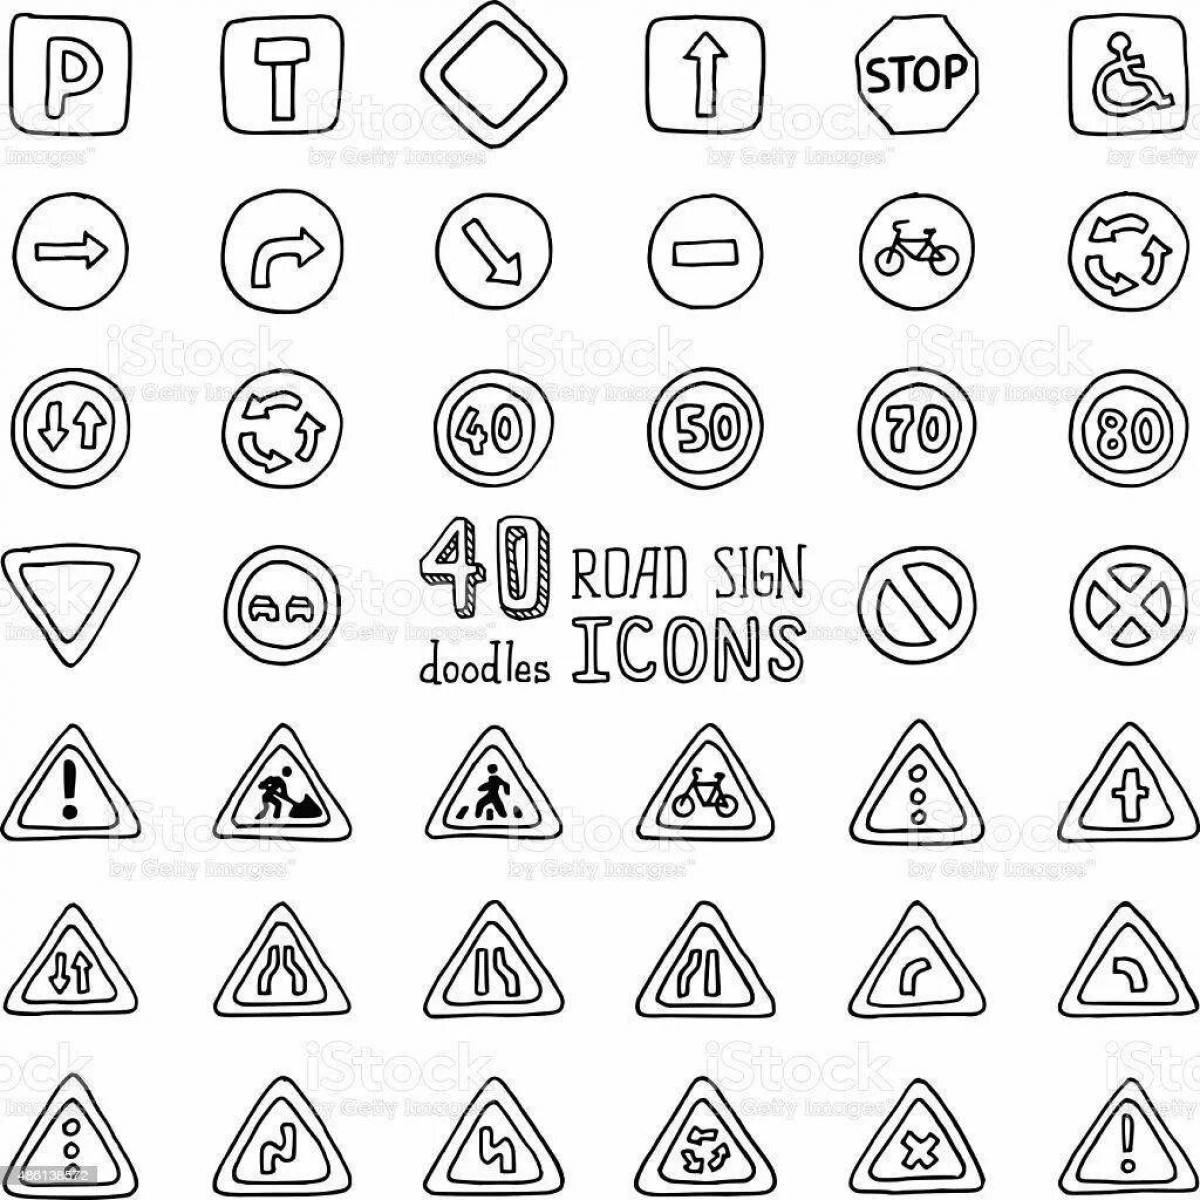 Fun coloring pages with traffic signs for kids